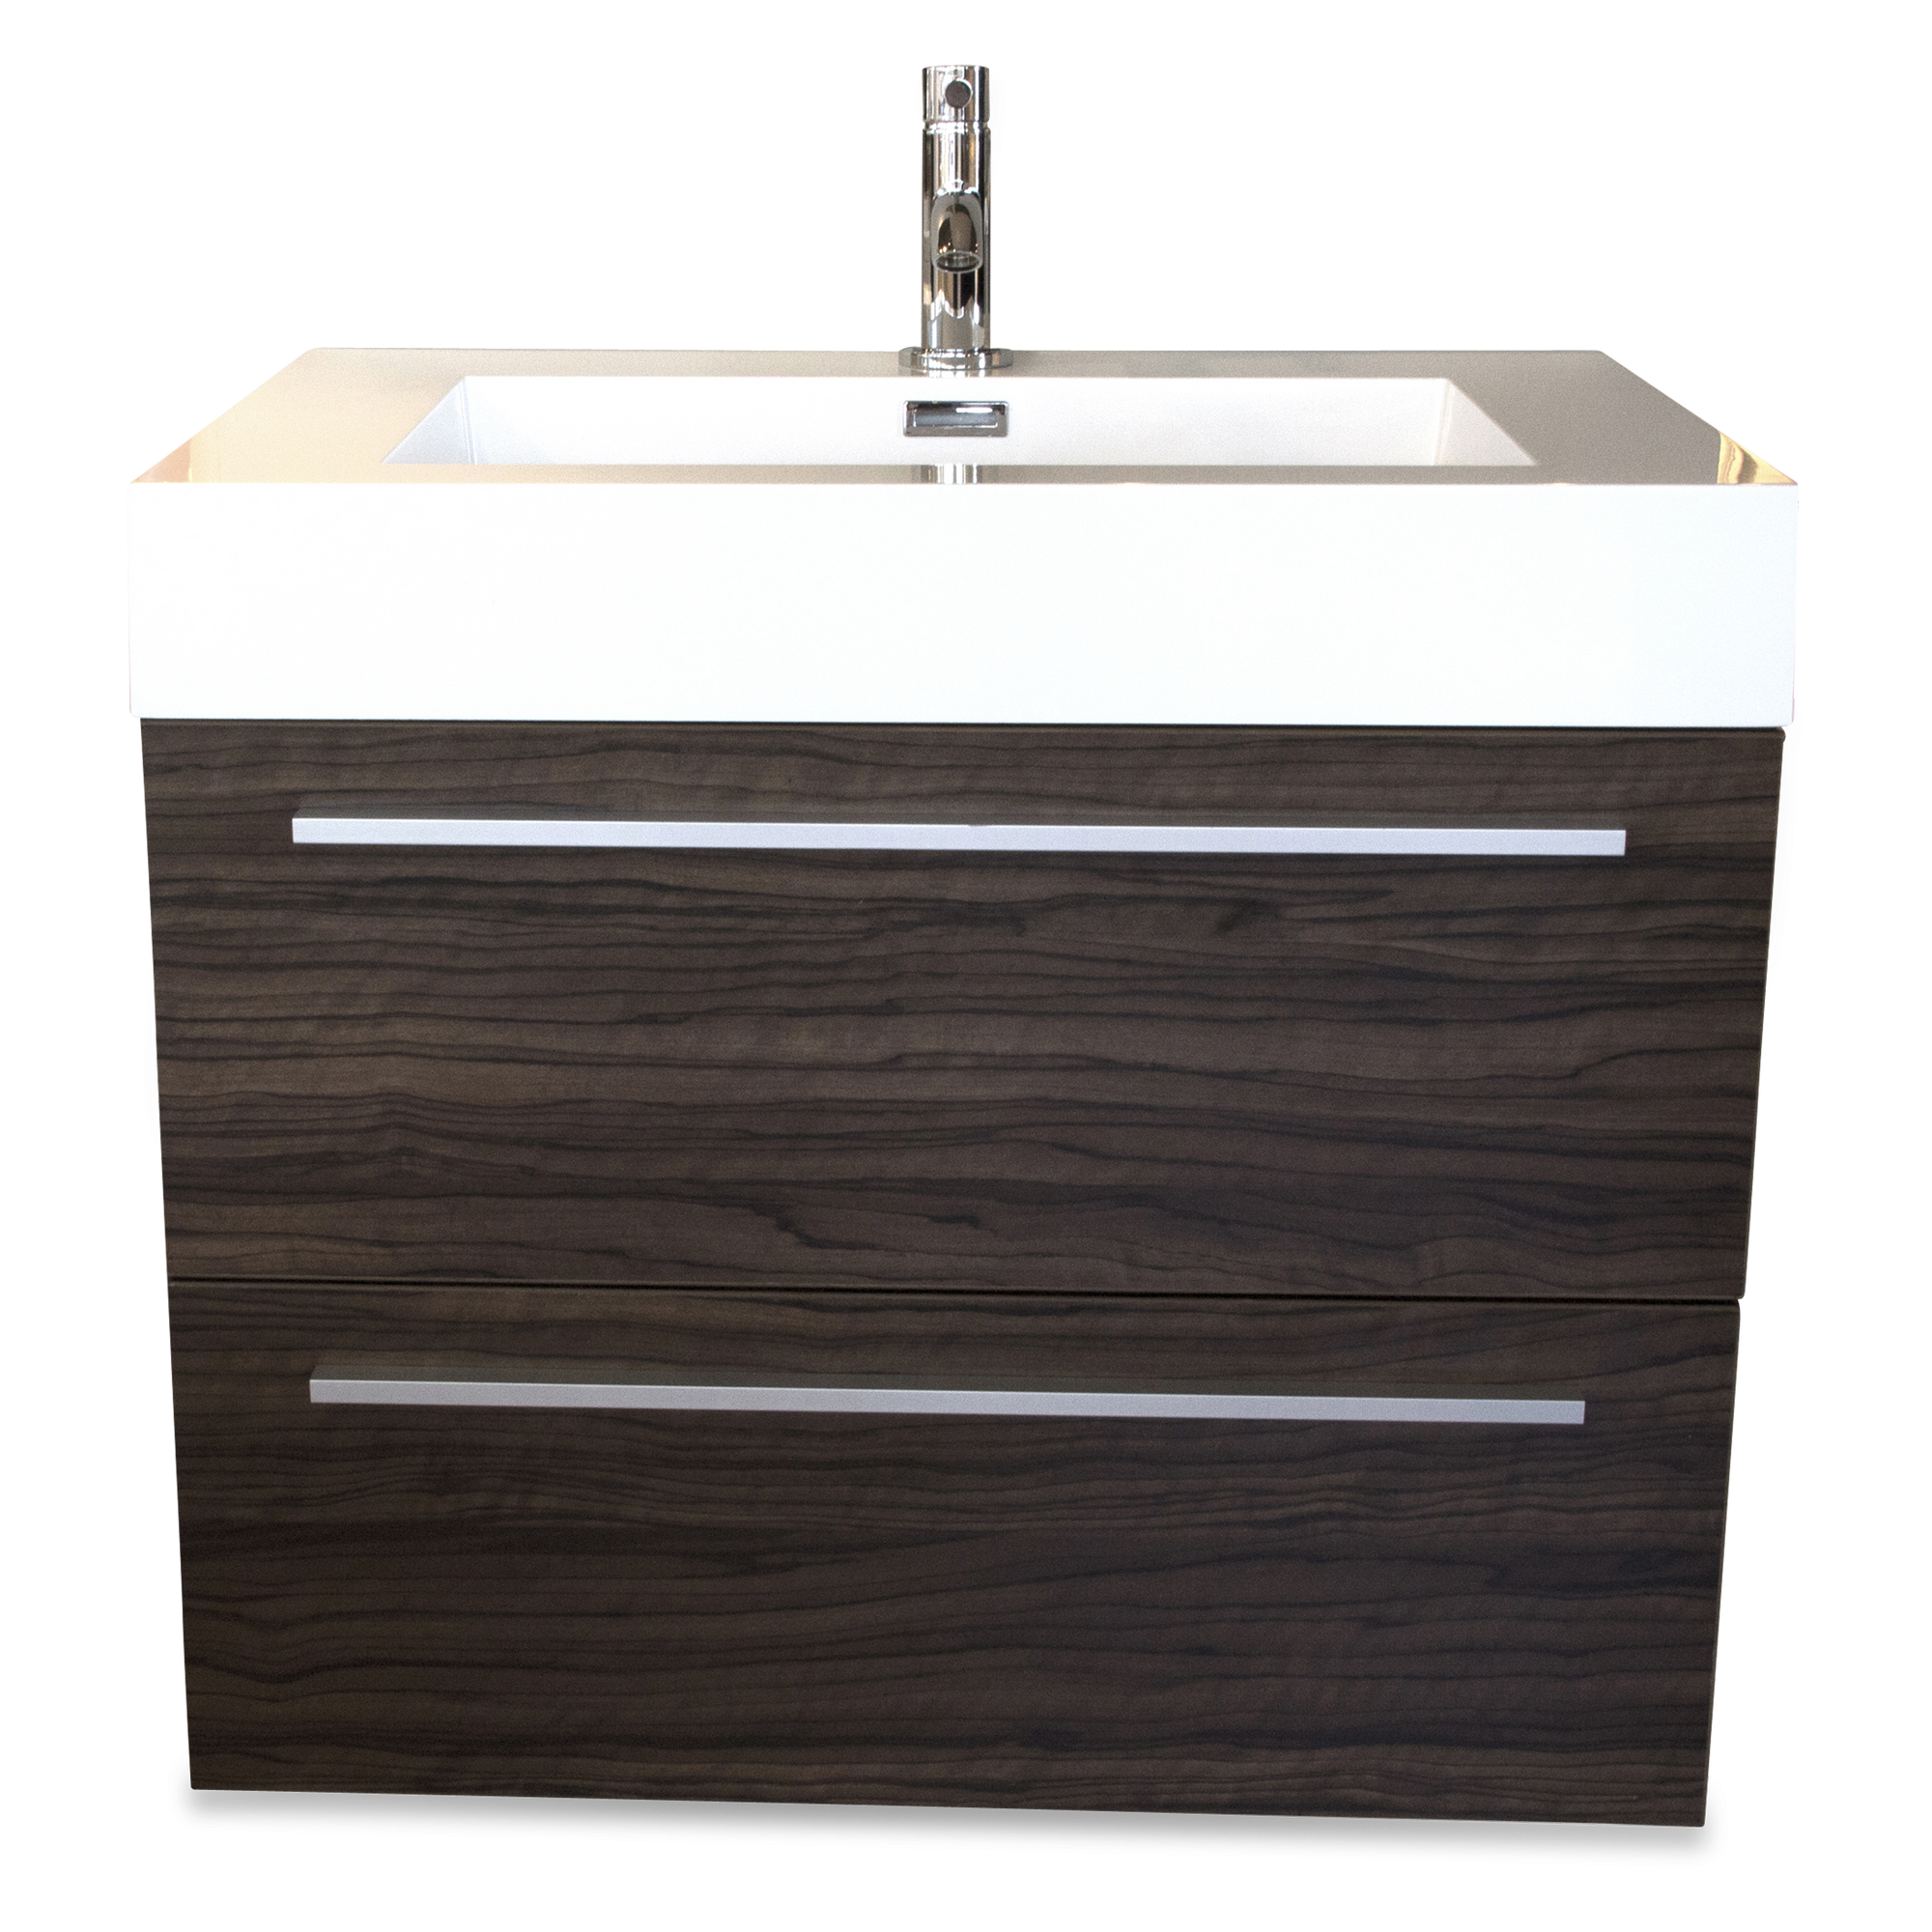 VANITY: The versatile design of the Contact vanity brings a modern sensibility to the bath.